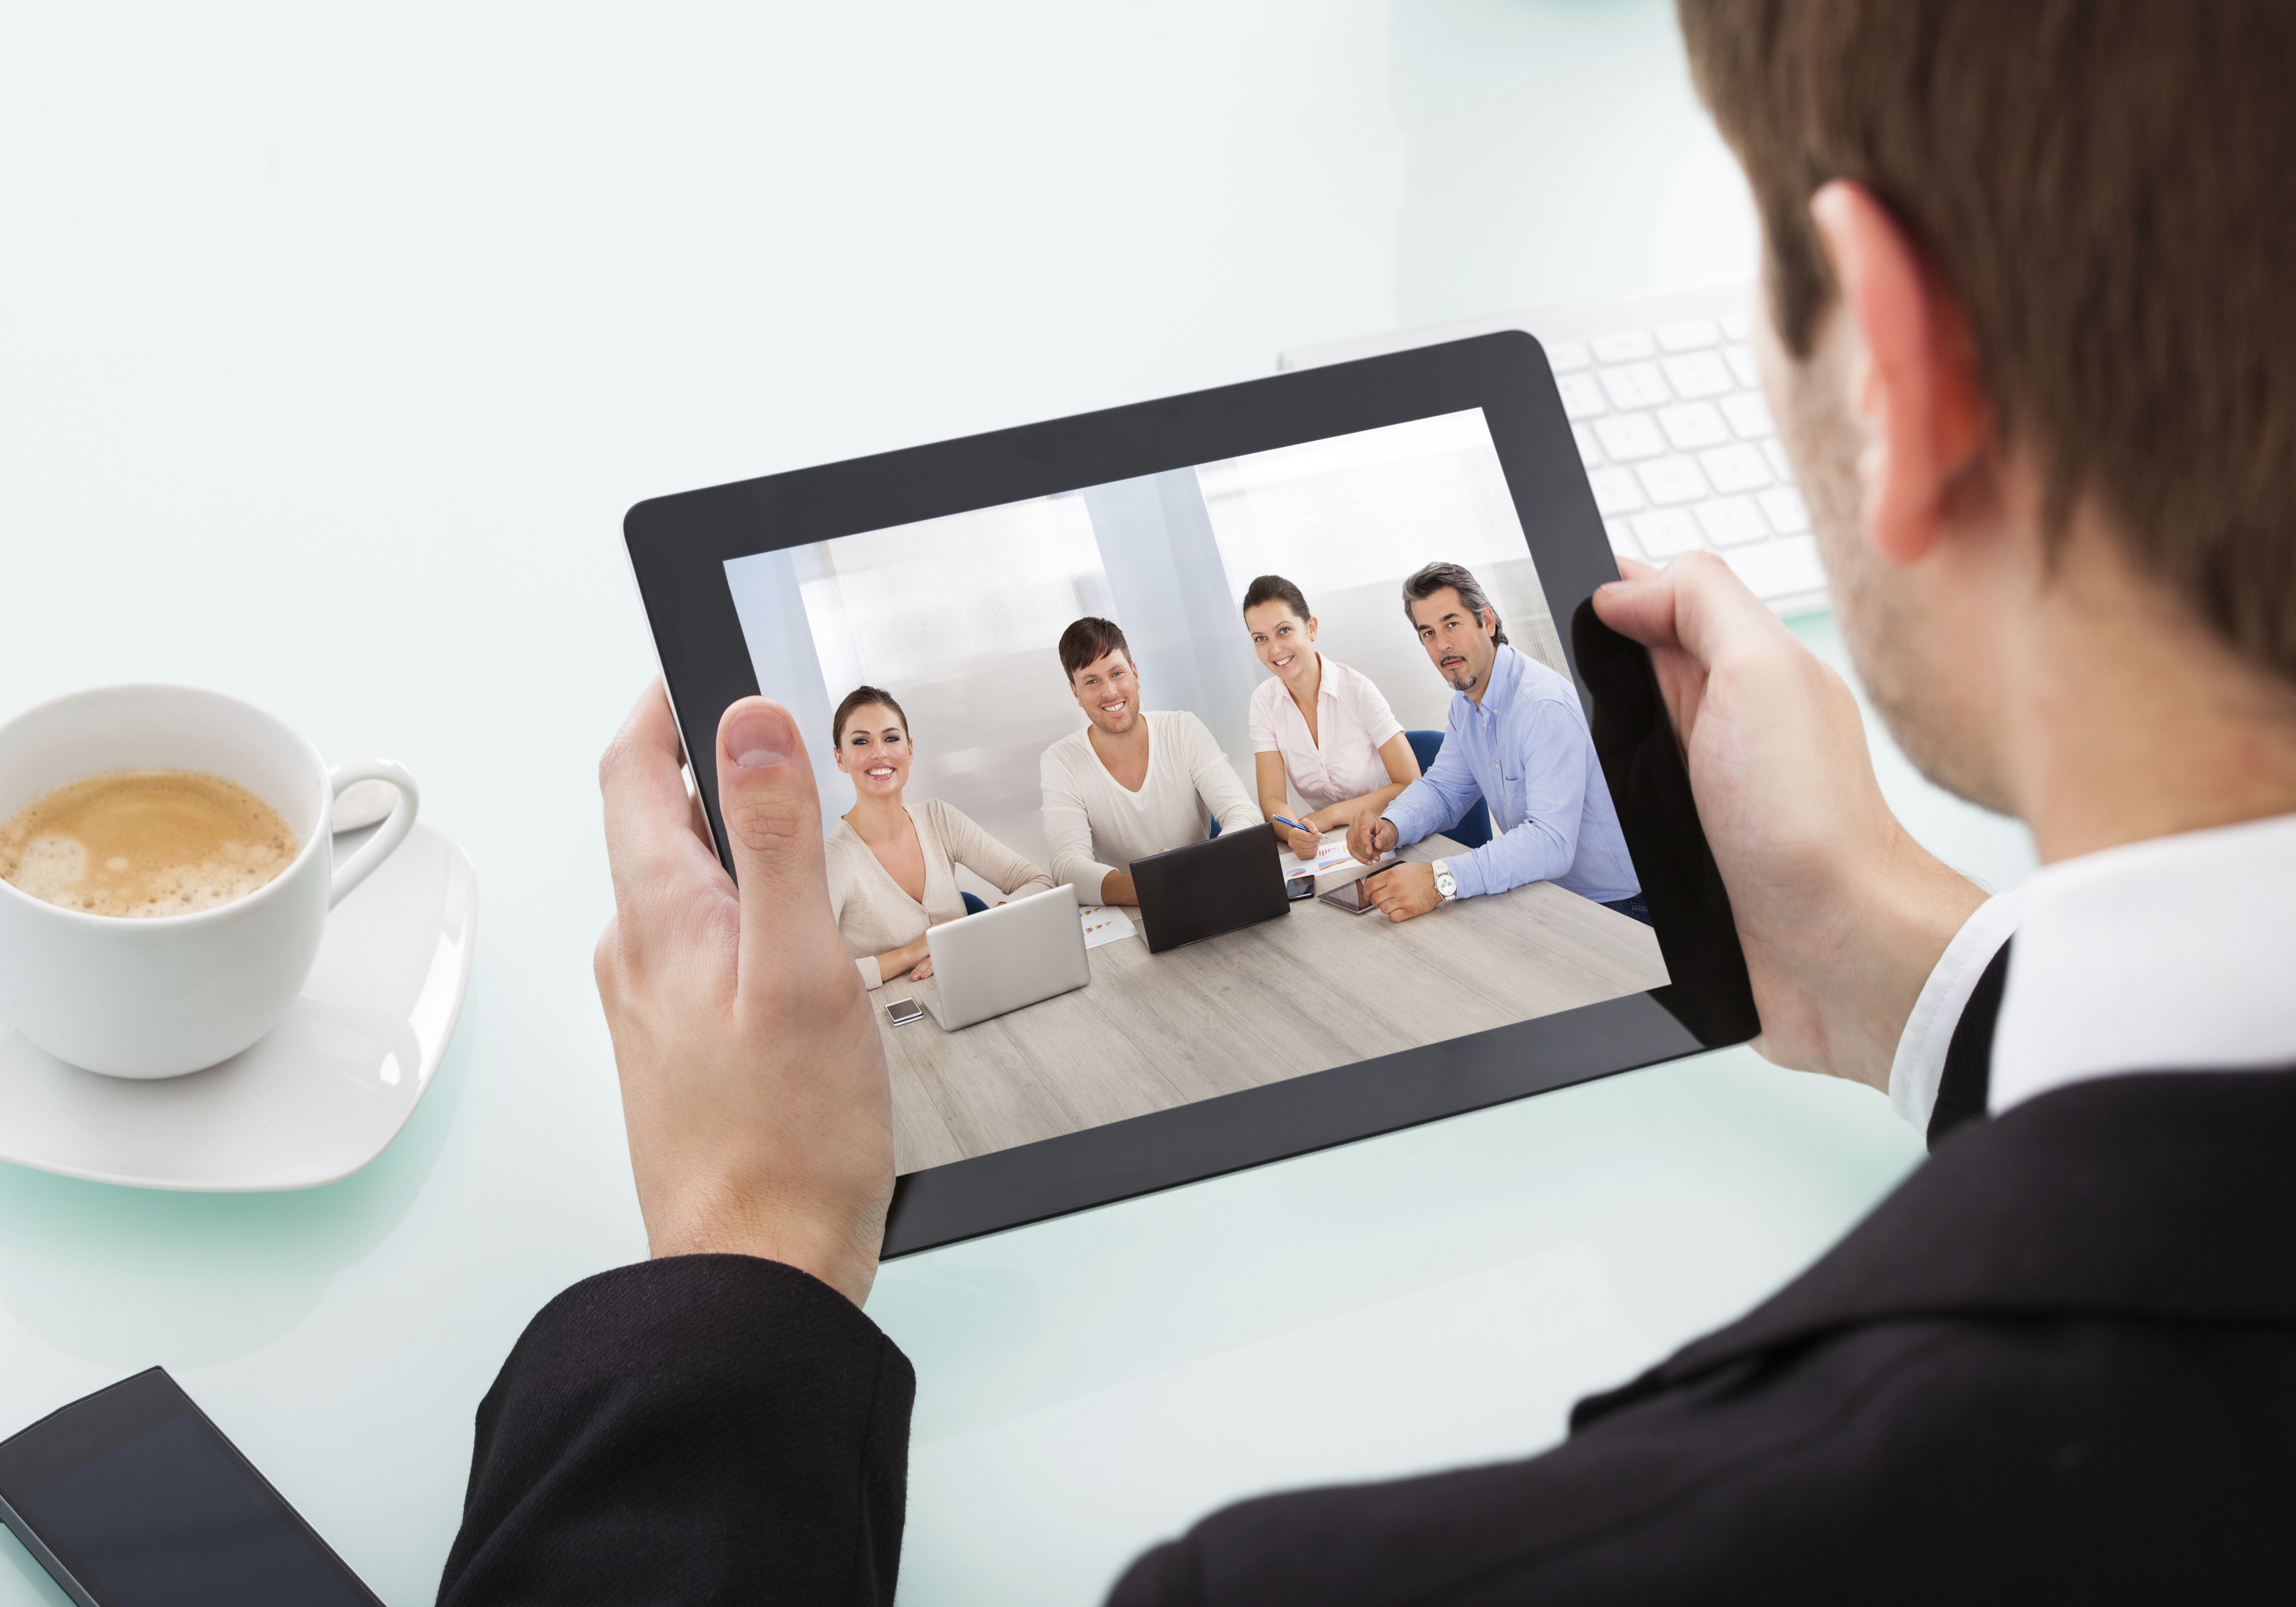 Get More from Your Video Interview by Putting Candidates at Ease 